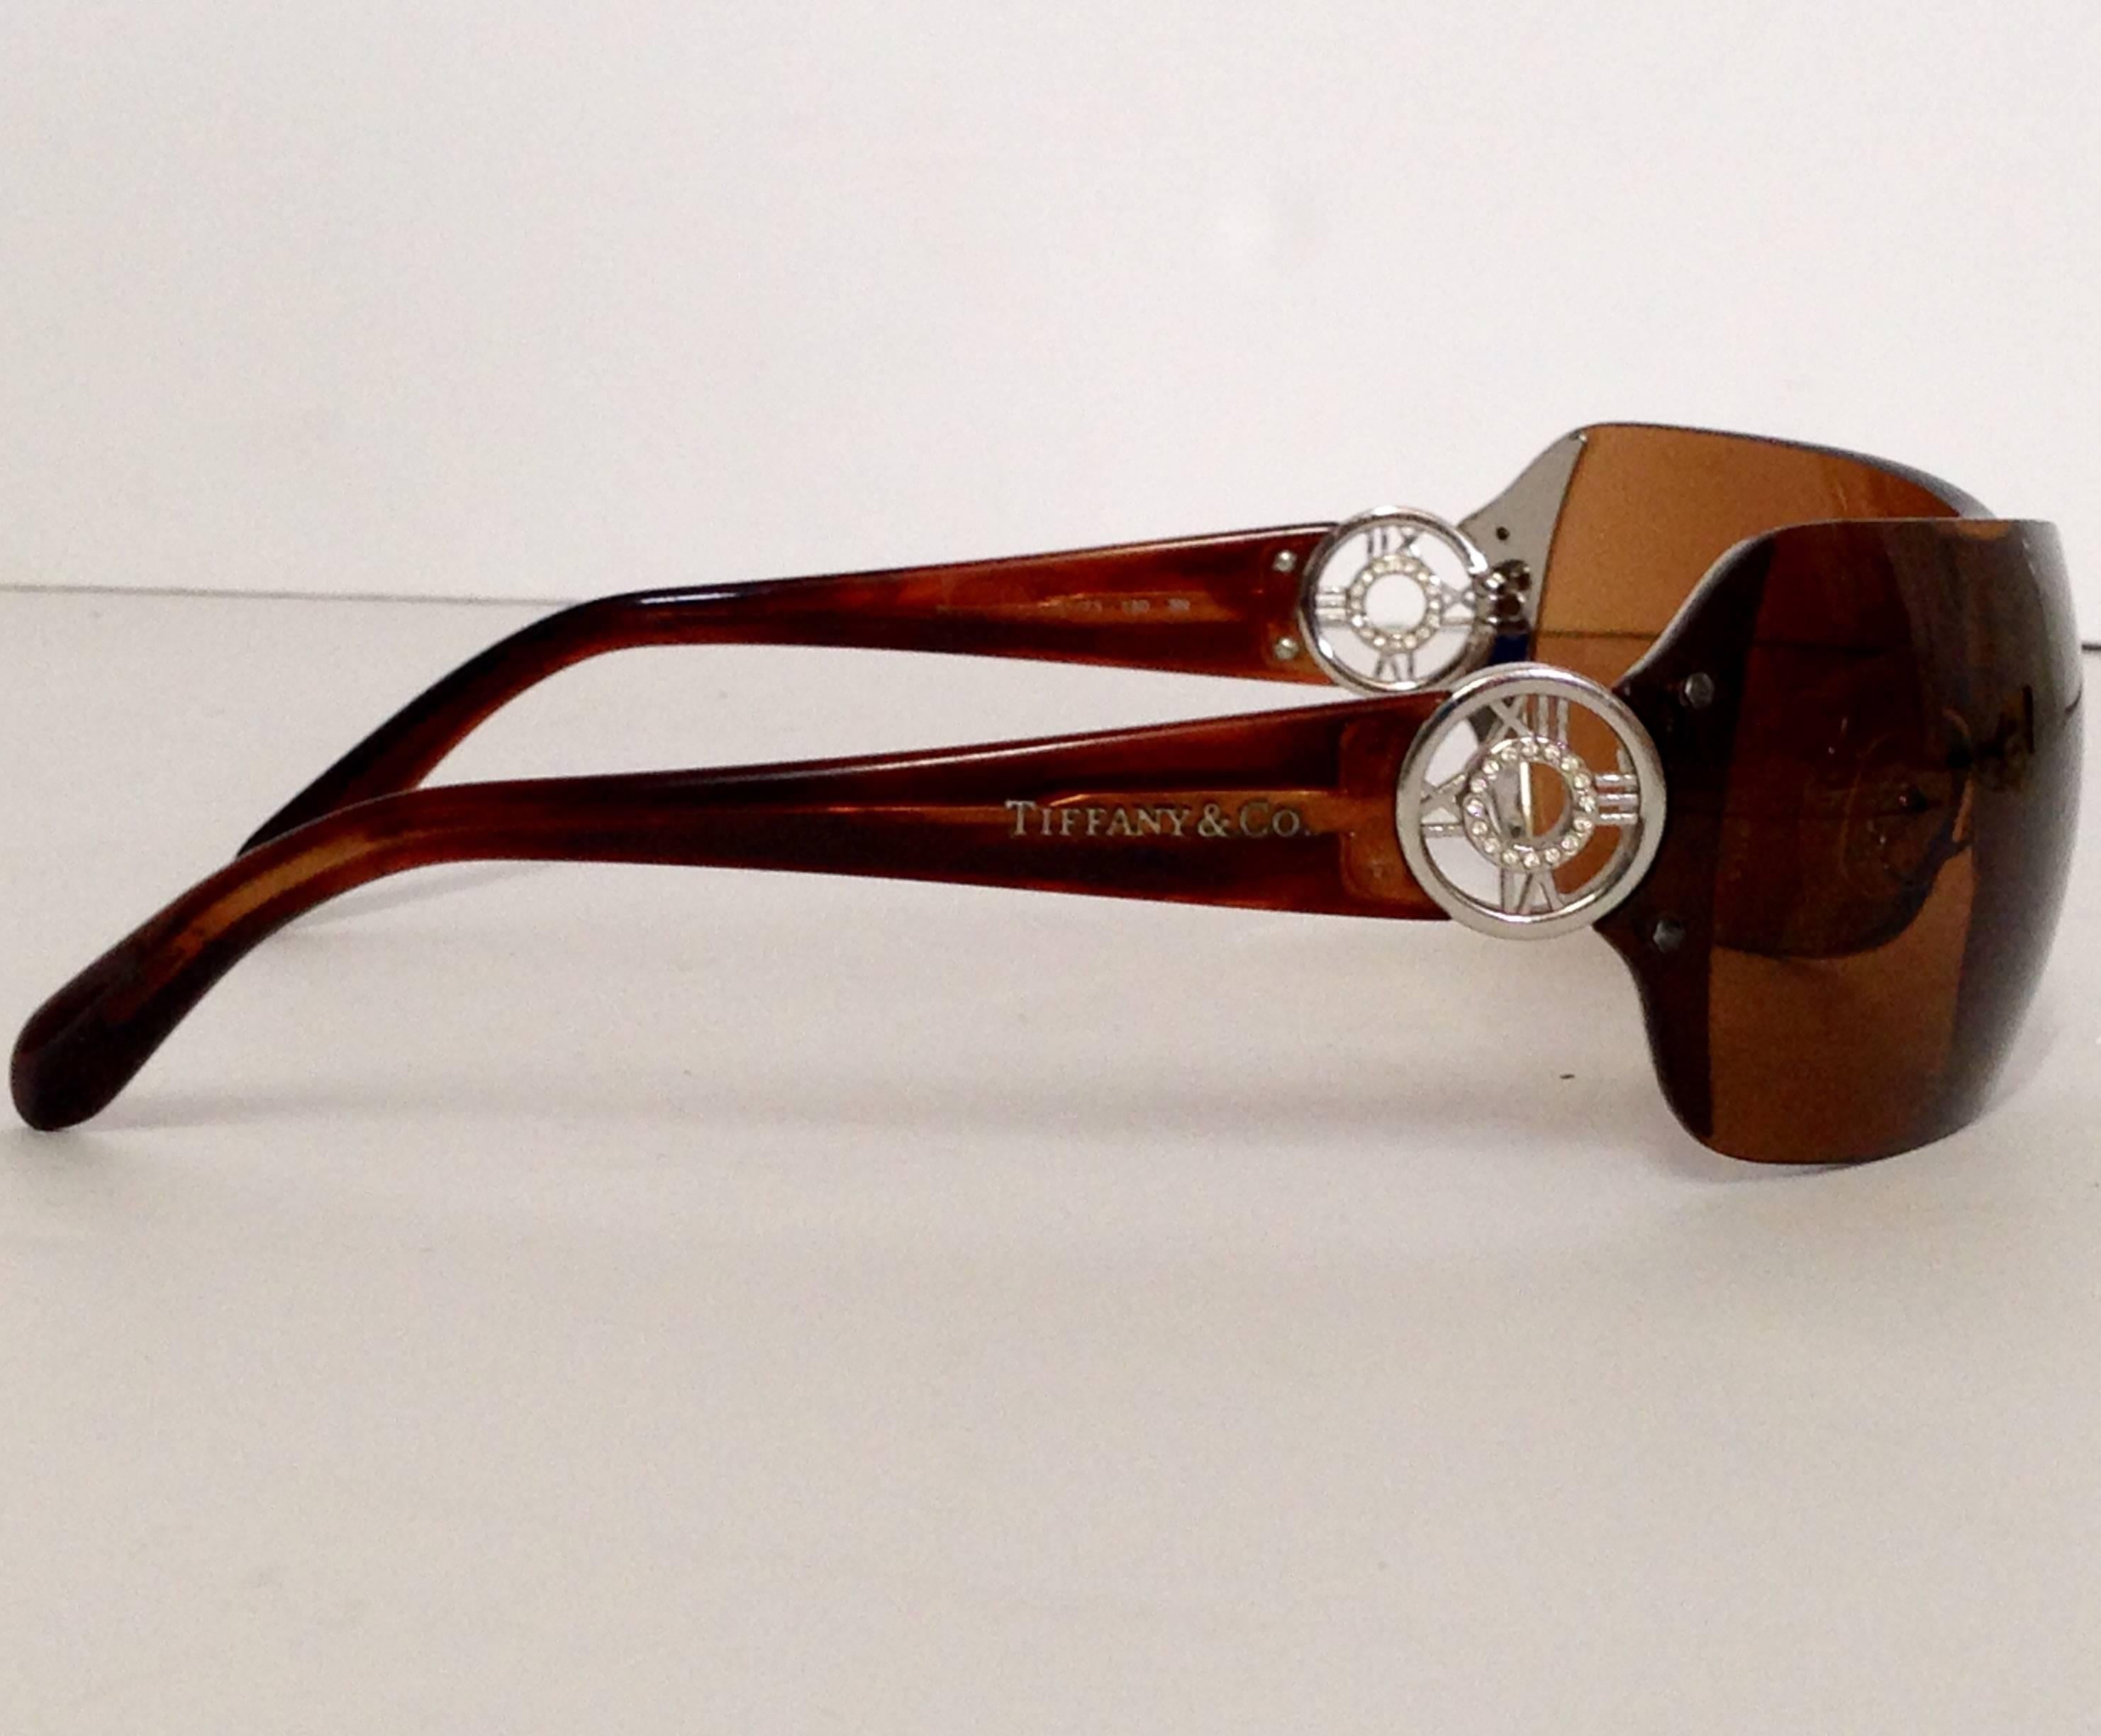 Rare vintage Tiffany & Co. iconic Roman numeral logo tinted sunglasses. The silver tone round roman numeral detail at the temples are embellished with clear crystal Swarovski rhinestones. Signed left front lens T & Co. Model or production